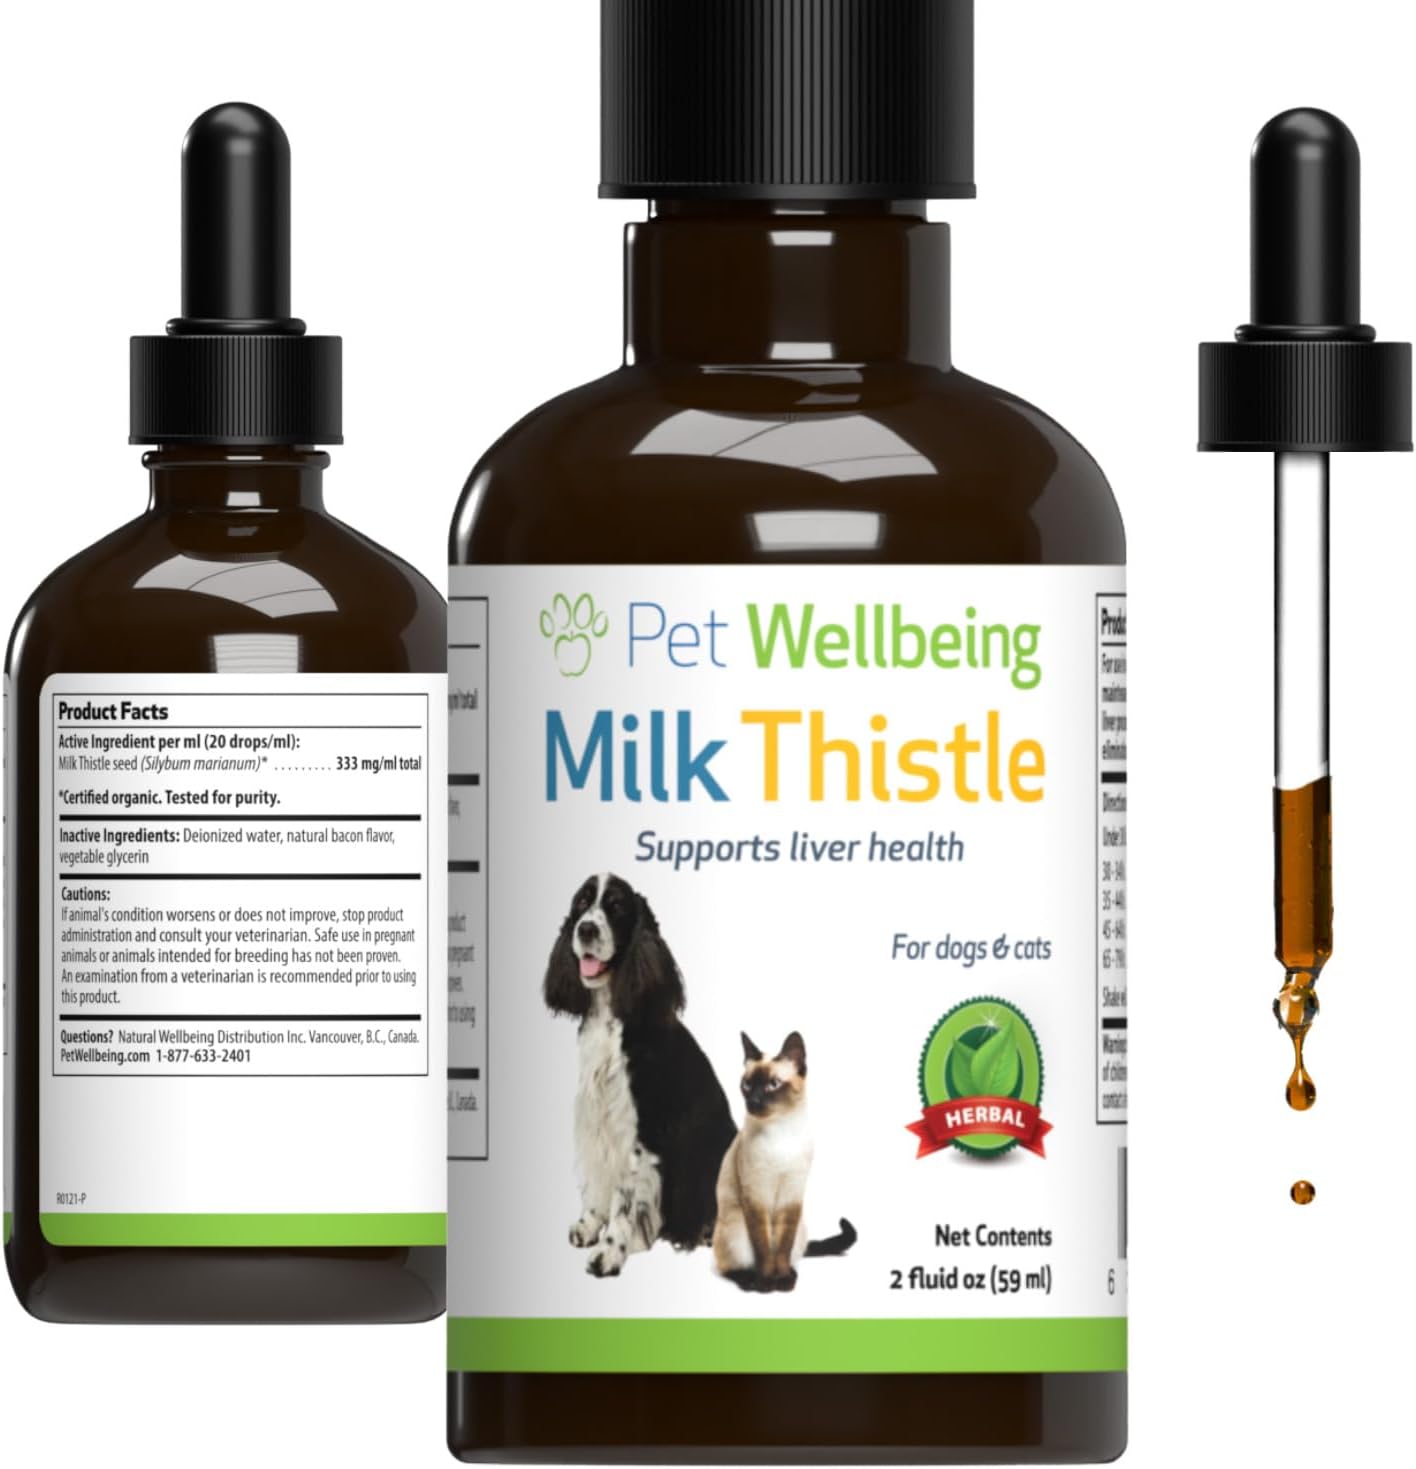 Pet Wellbeing Milk Thistle for Dogs - Supports Liver Health, Protects Liver - Glycerin-Based Natural Herbal Supplement - 2 oz (59 ml)